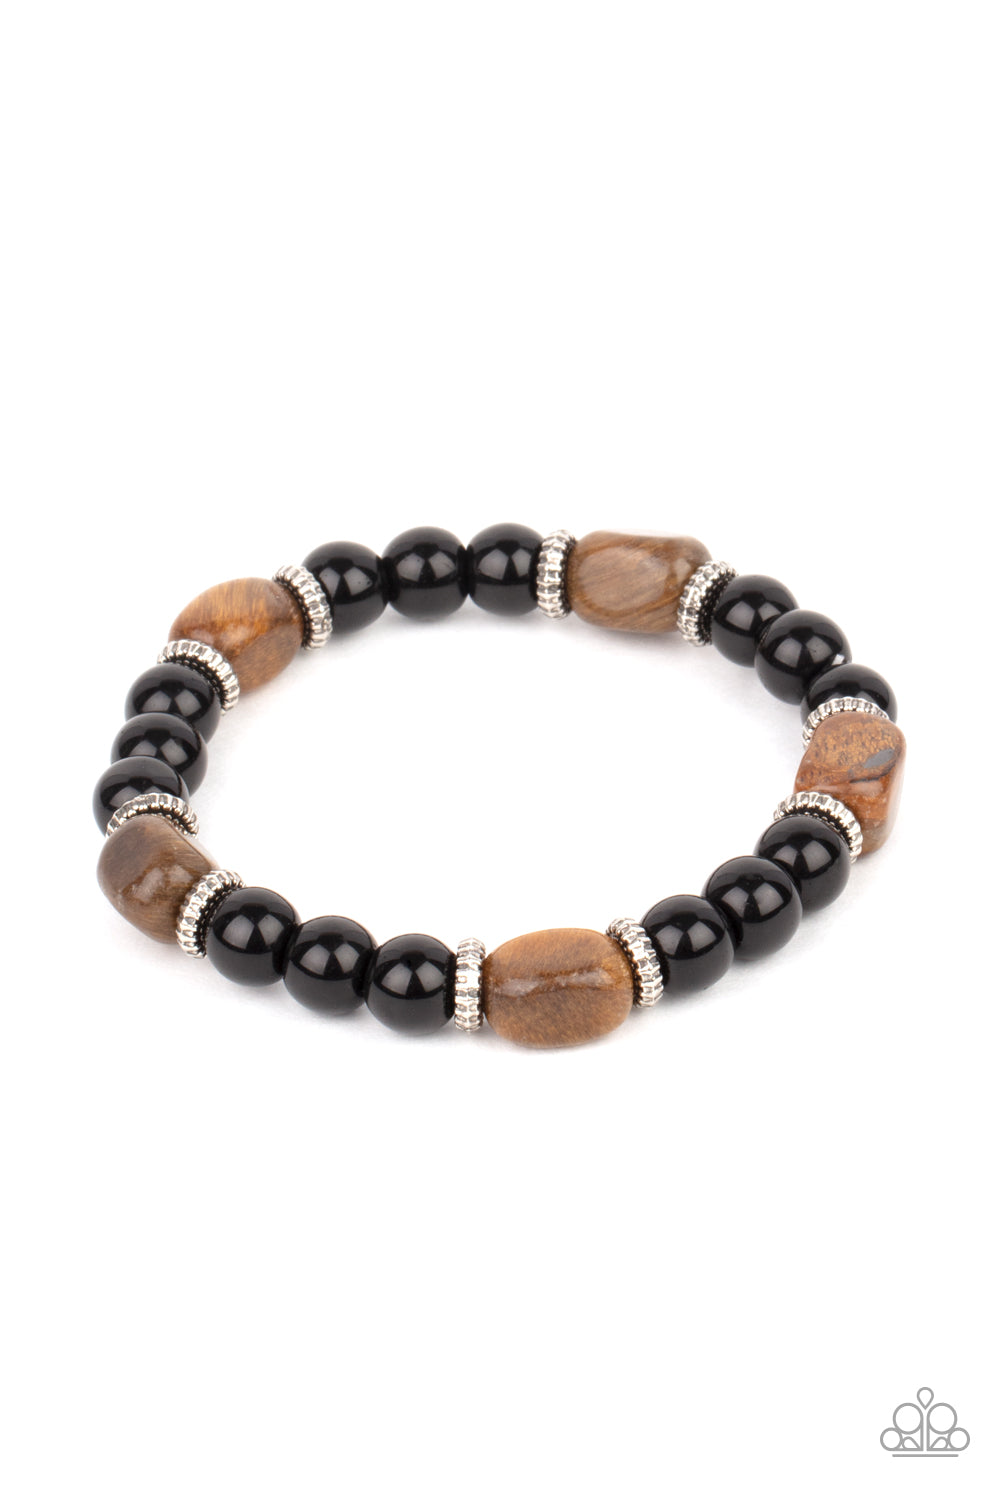 Unity - Brown Tiger's Eye Urban Stretch Bracelets infused with dainty silver accents, glassy black and tiger's eye stone beads are threaded along a stretchy band around the wrist for a stackable seasonal look.  Sold as one individual bracelet.  Paparazzi Jewelry is lead and nickel free so it's perfect for sensitive skin too!